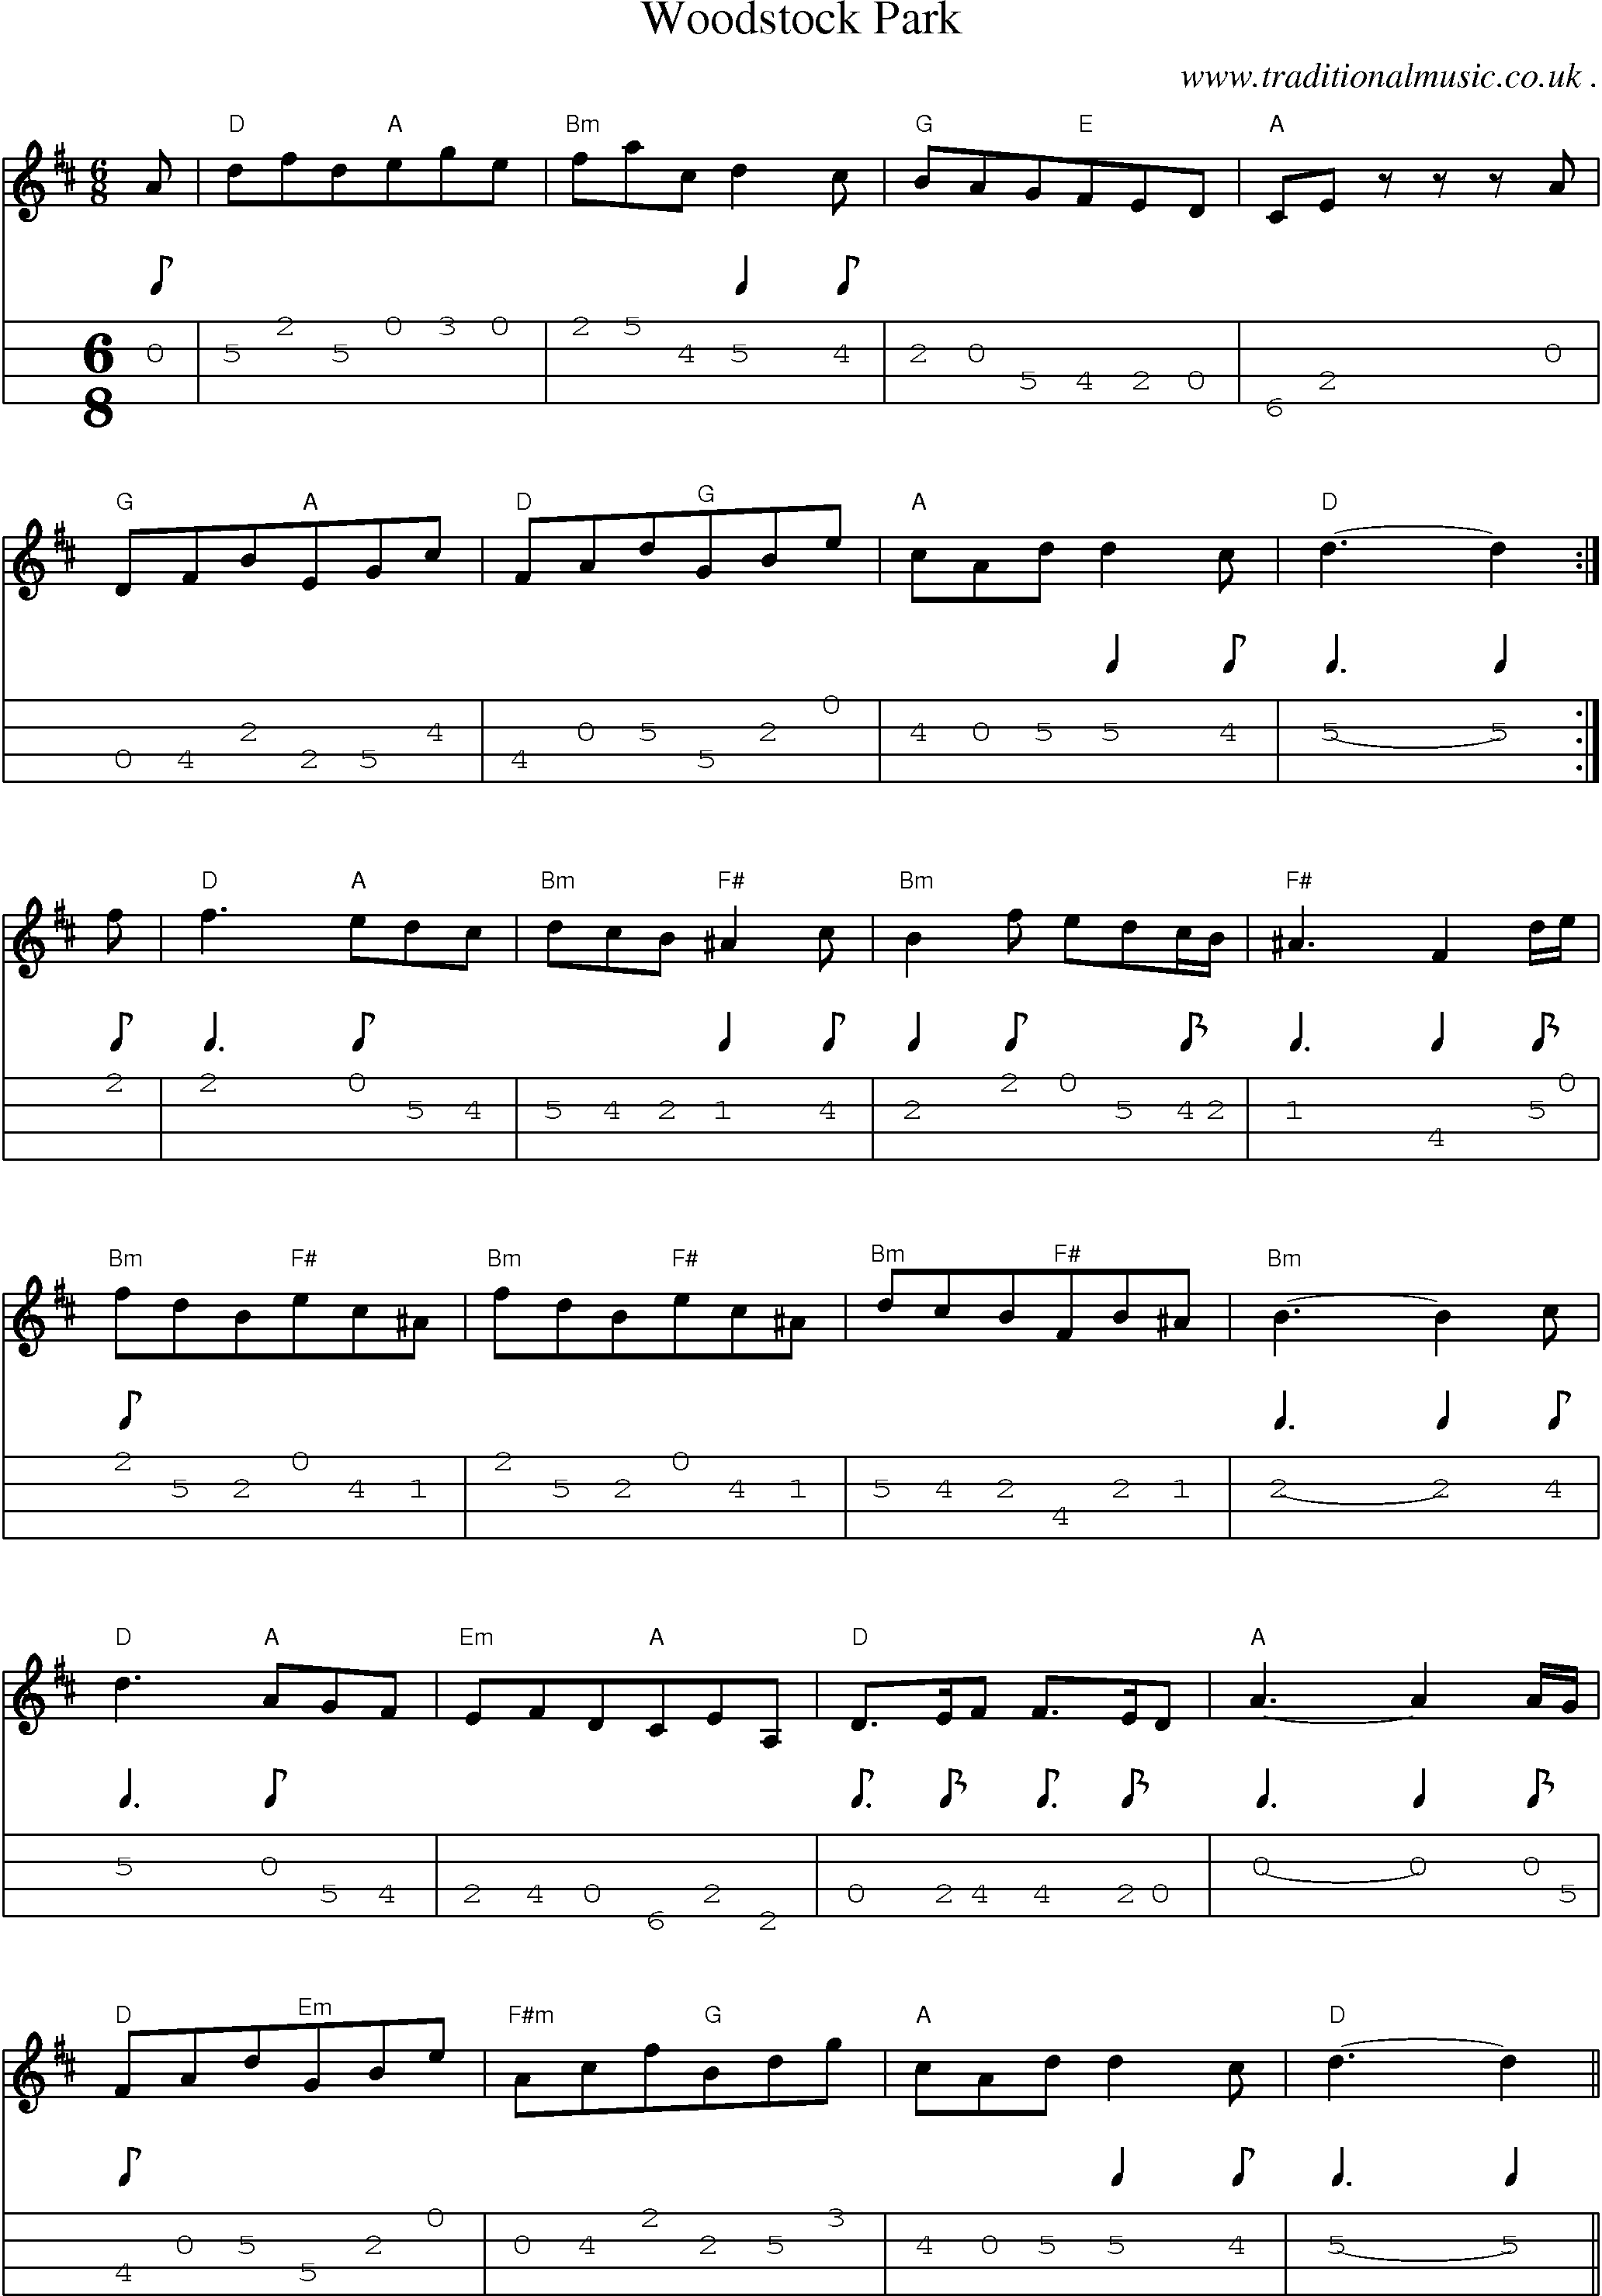 Sheet-Music and Mandolin Tabs for Woodstock Park